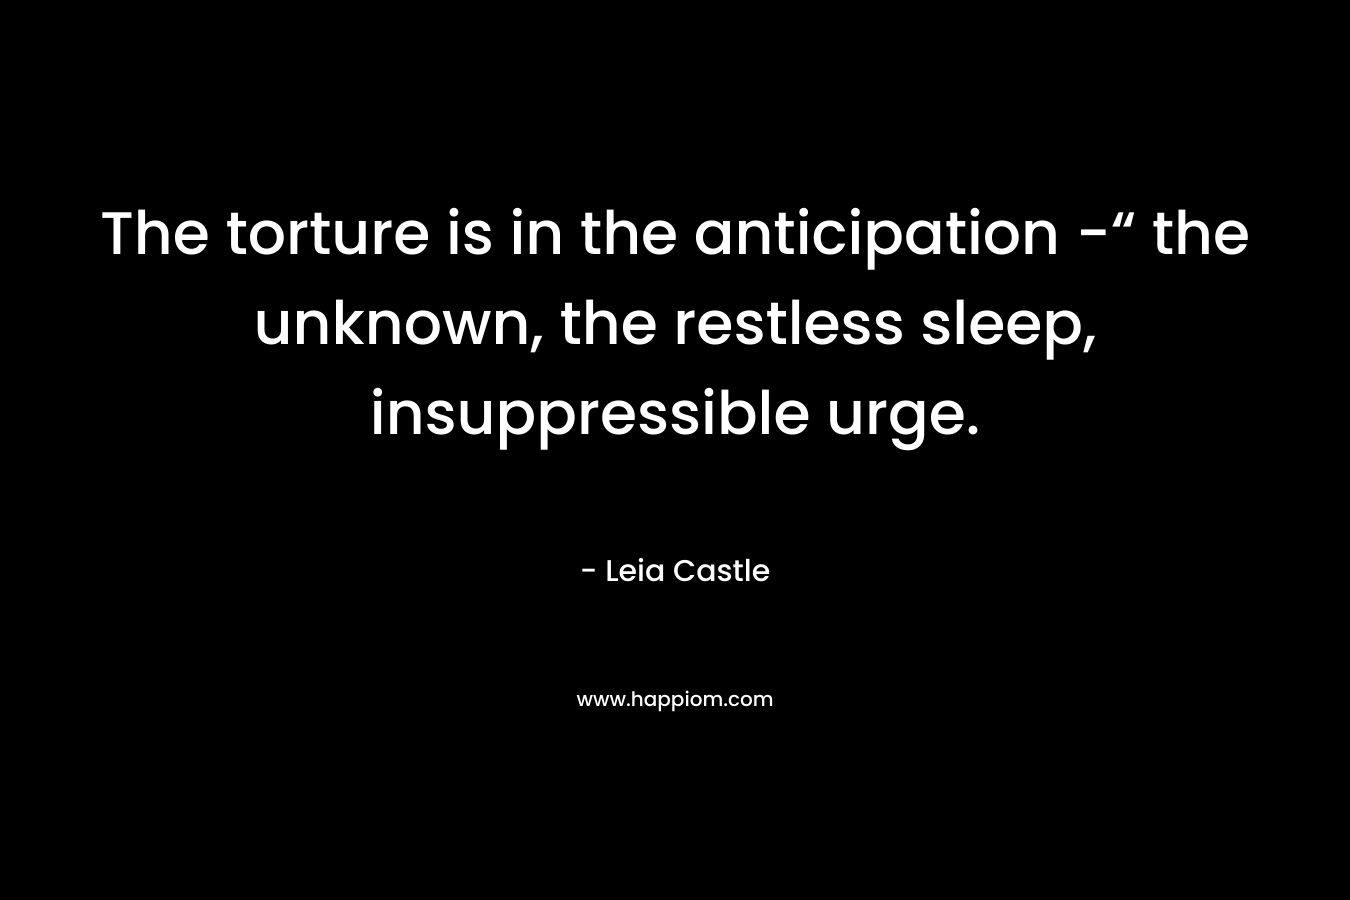 The torture is in the anticipation -“ the unknown, the restless sleep, insuppressible urge.